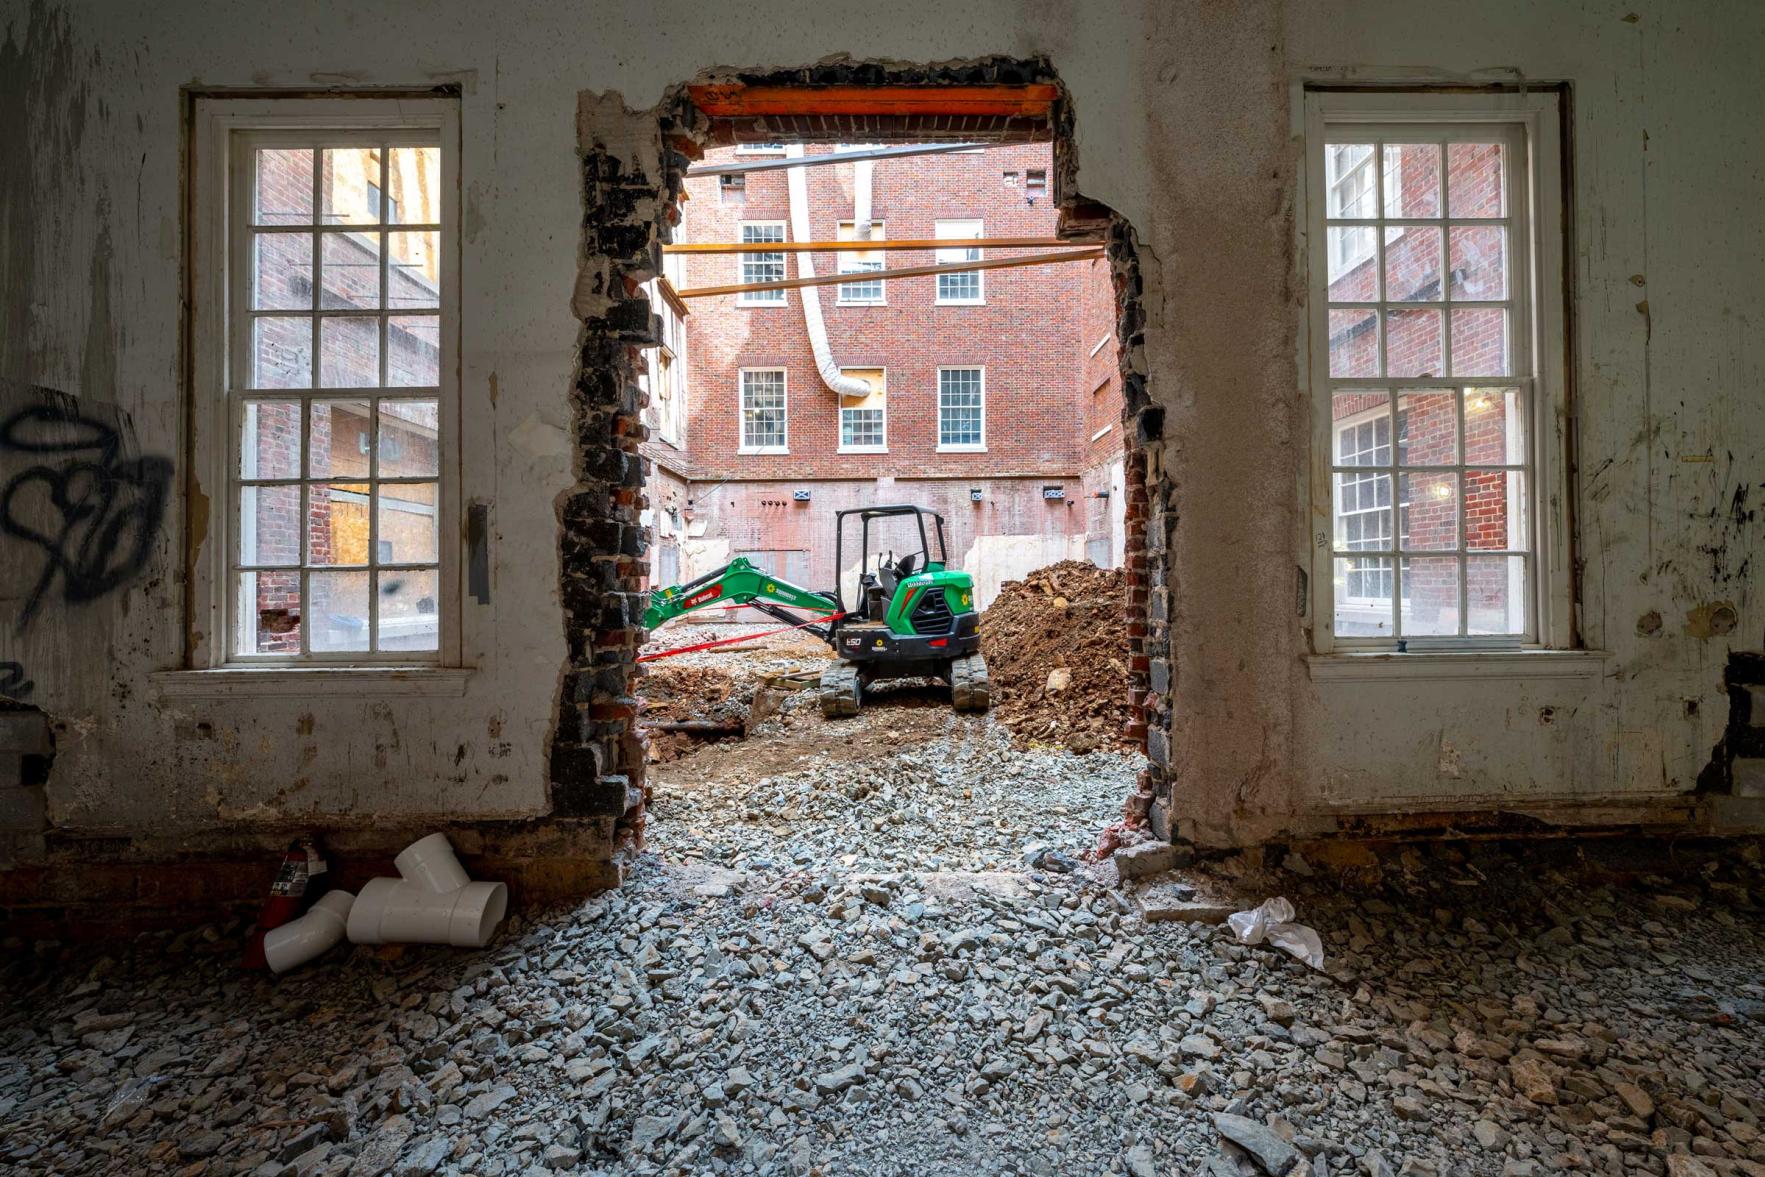 Through a demolished opening in a brick and plaster wall, a mini-excavator is visible in a courtyard